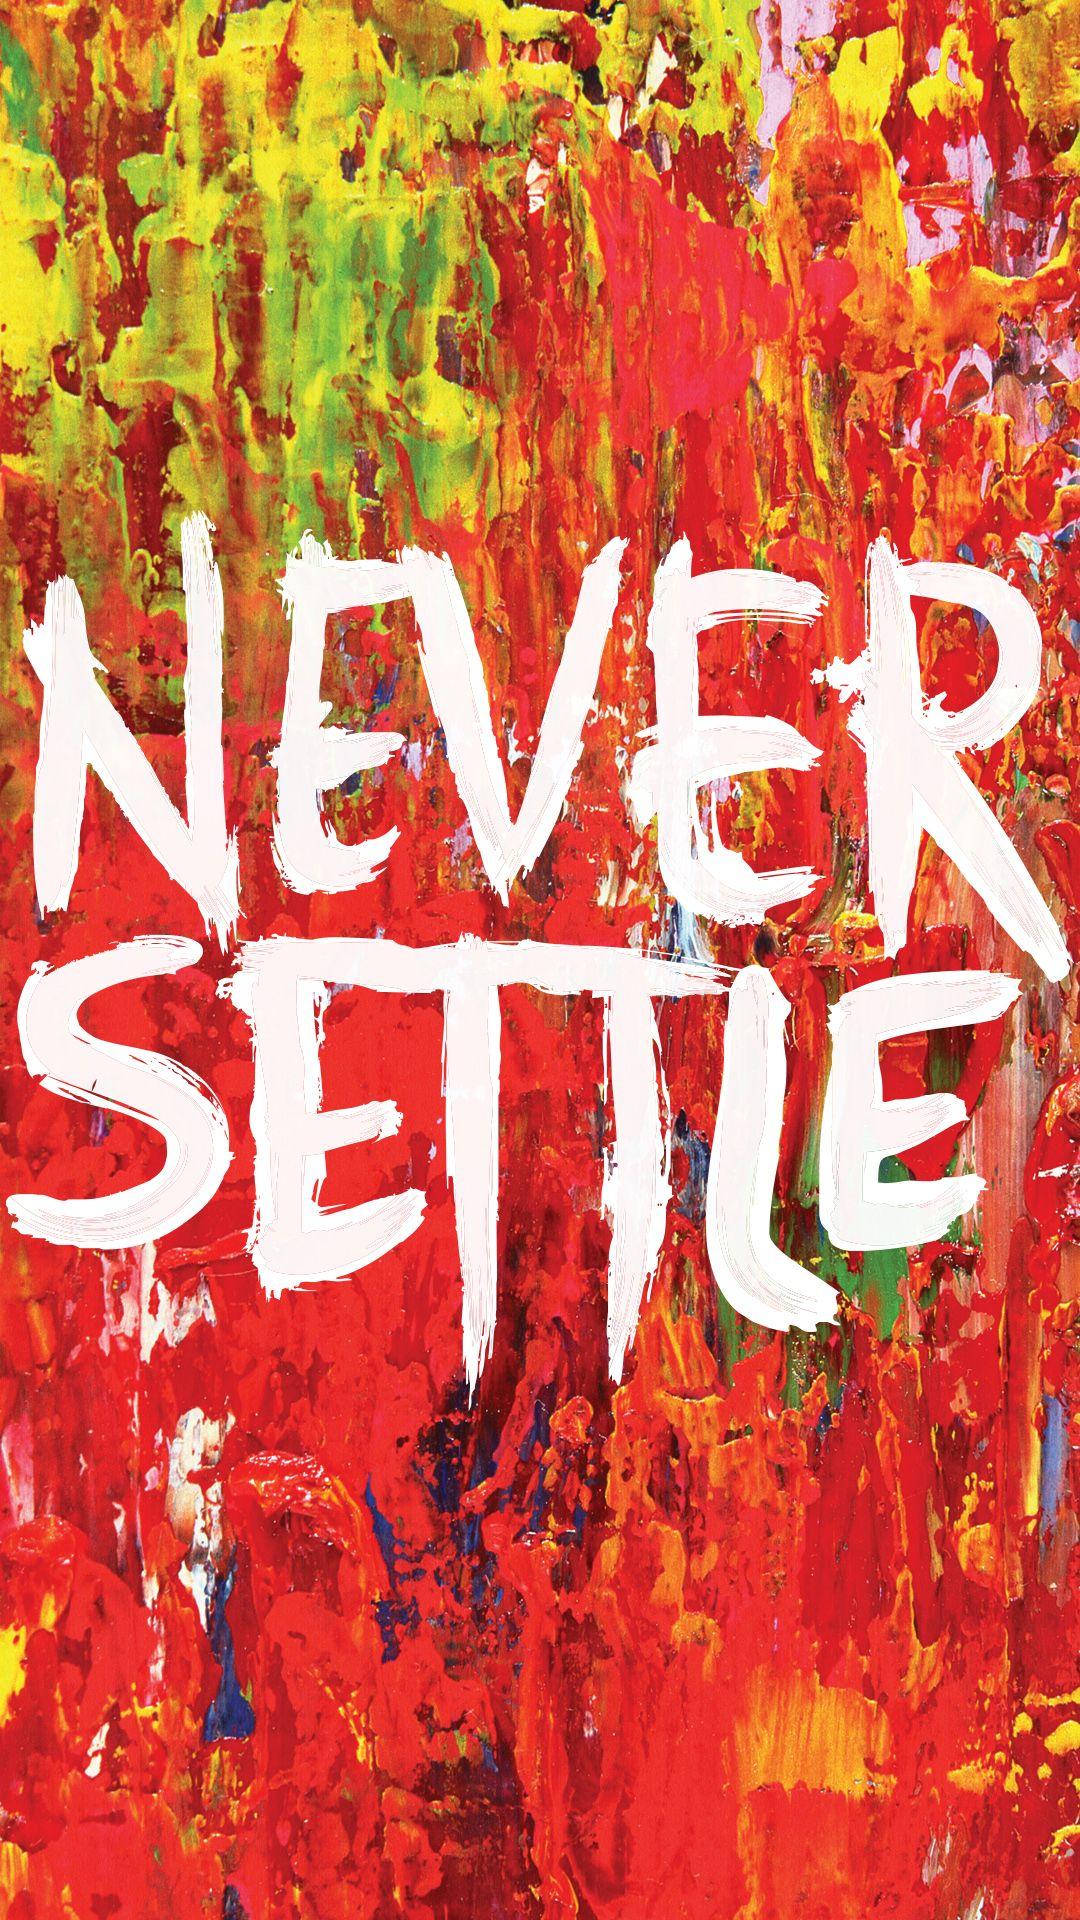 OnePlus launches #NeverSettle wallpaper campaign